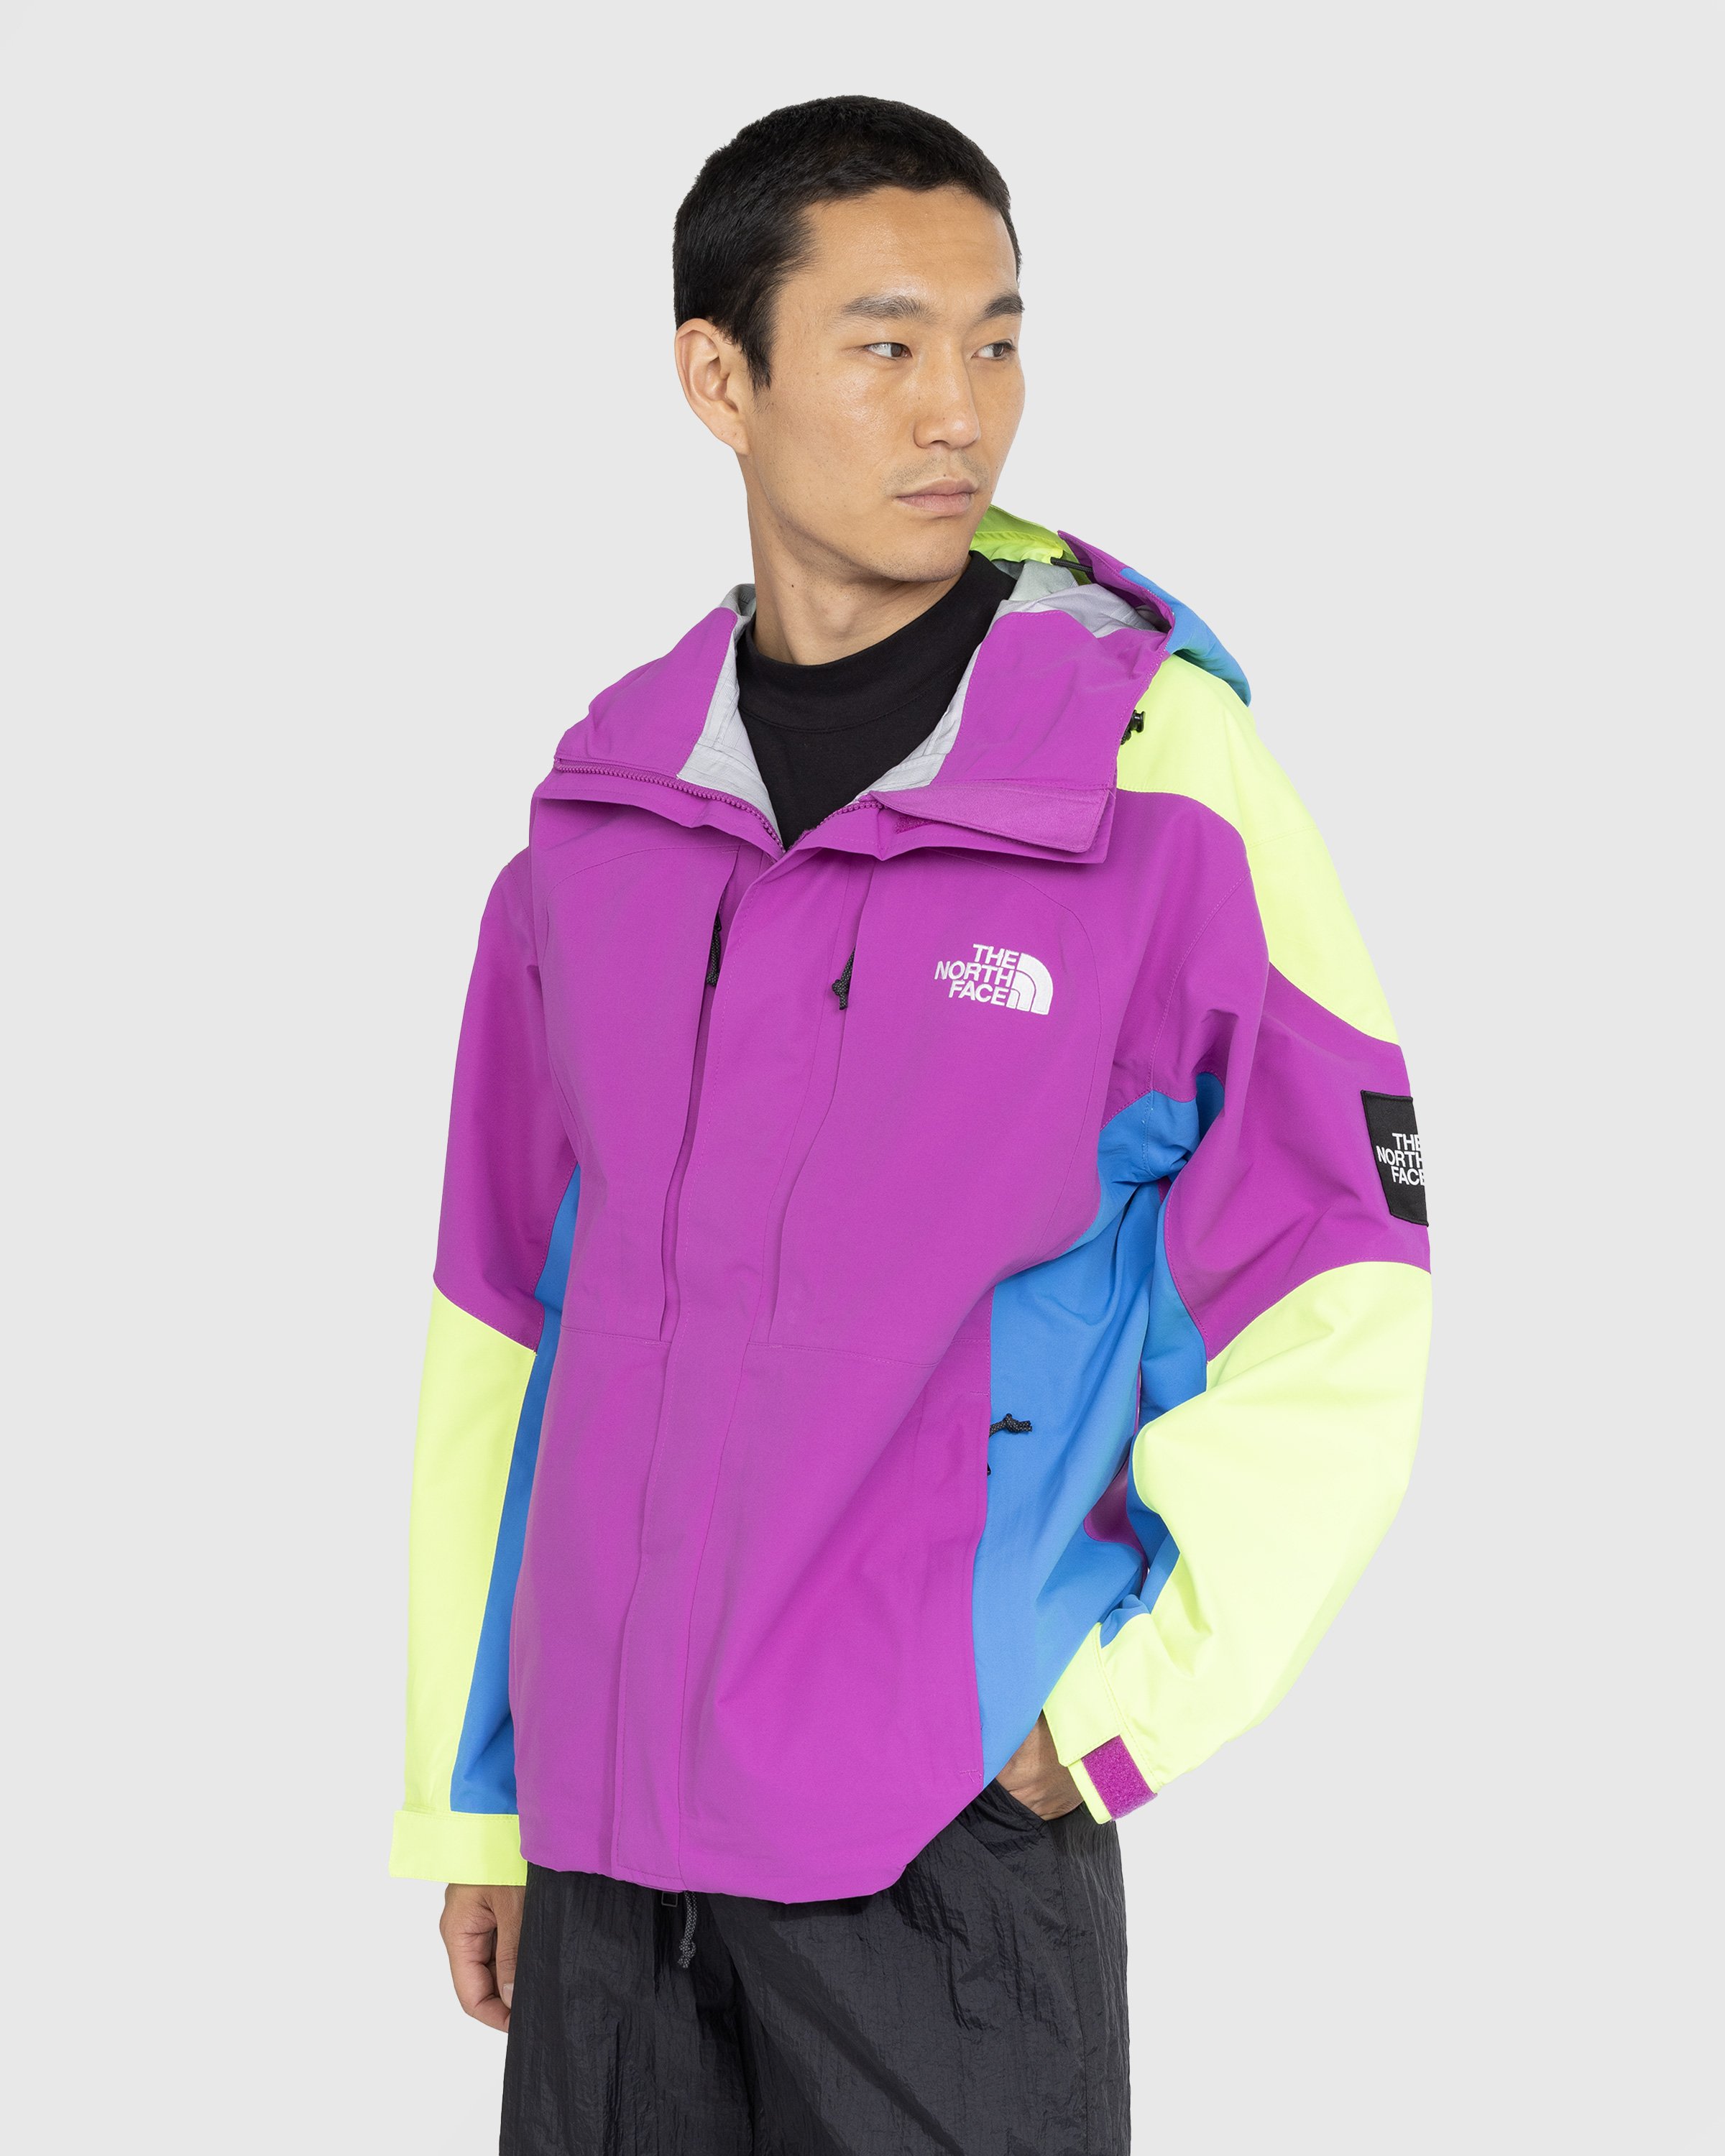 The North Face - 3L DryVent Carduelis Jacket Purple Cactus Flower/LED Yellow/Super Sonic Blue - Clothing - Multi - Image 2